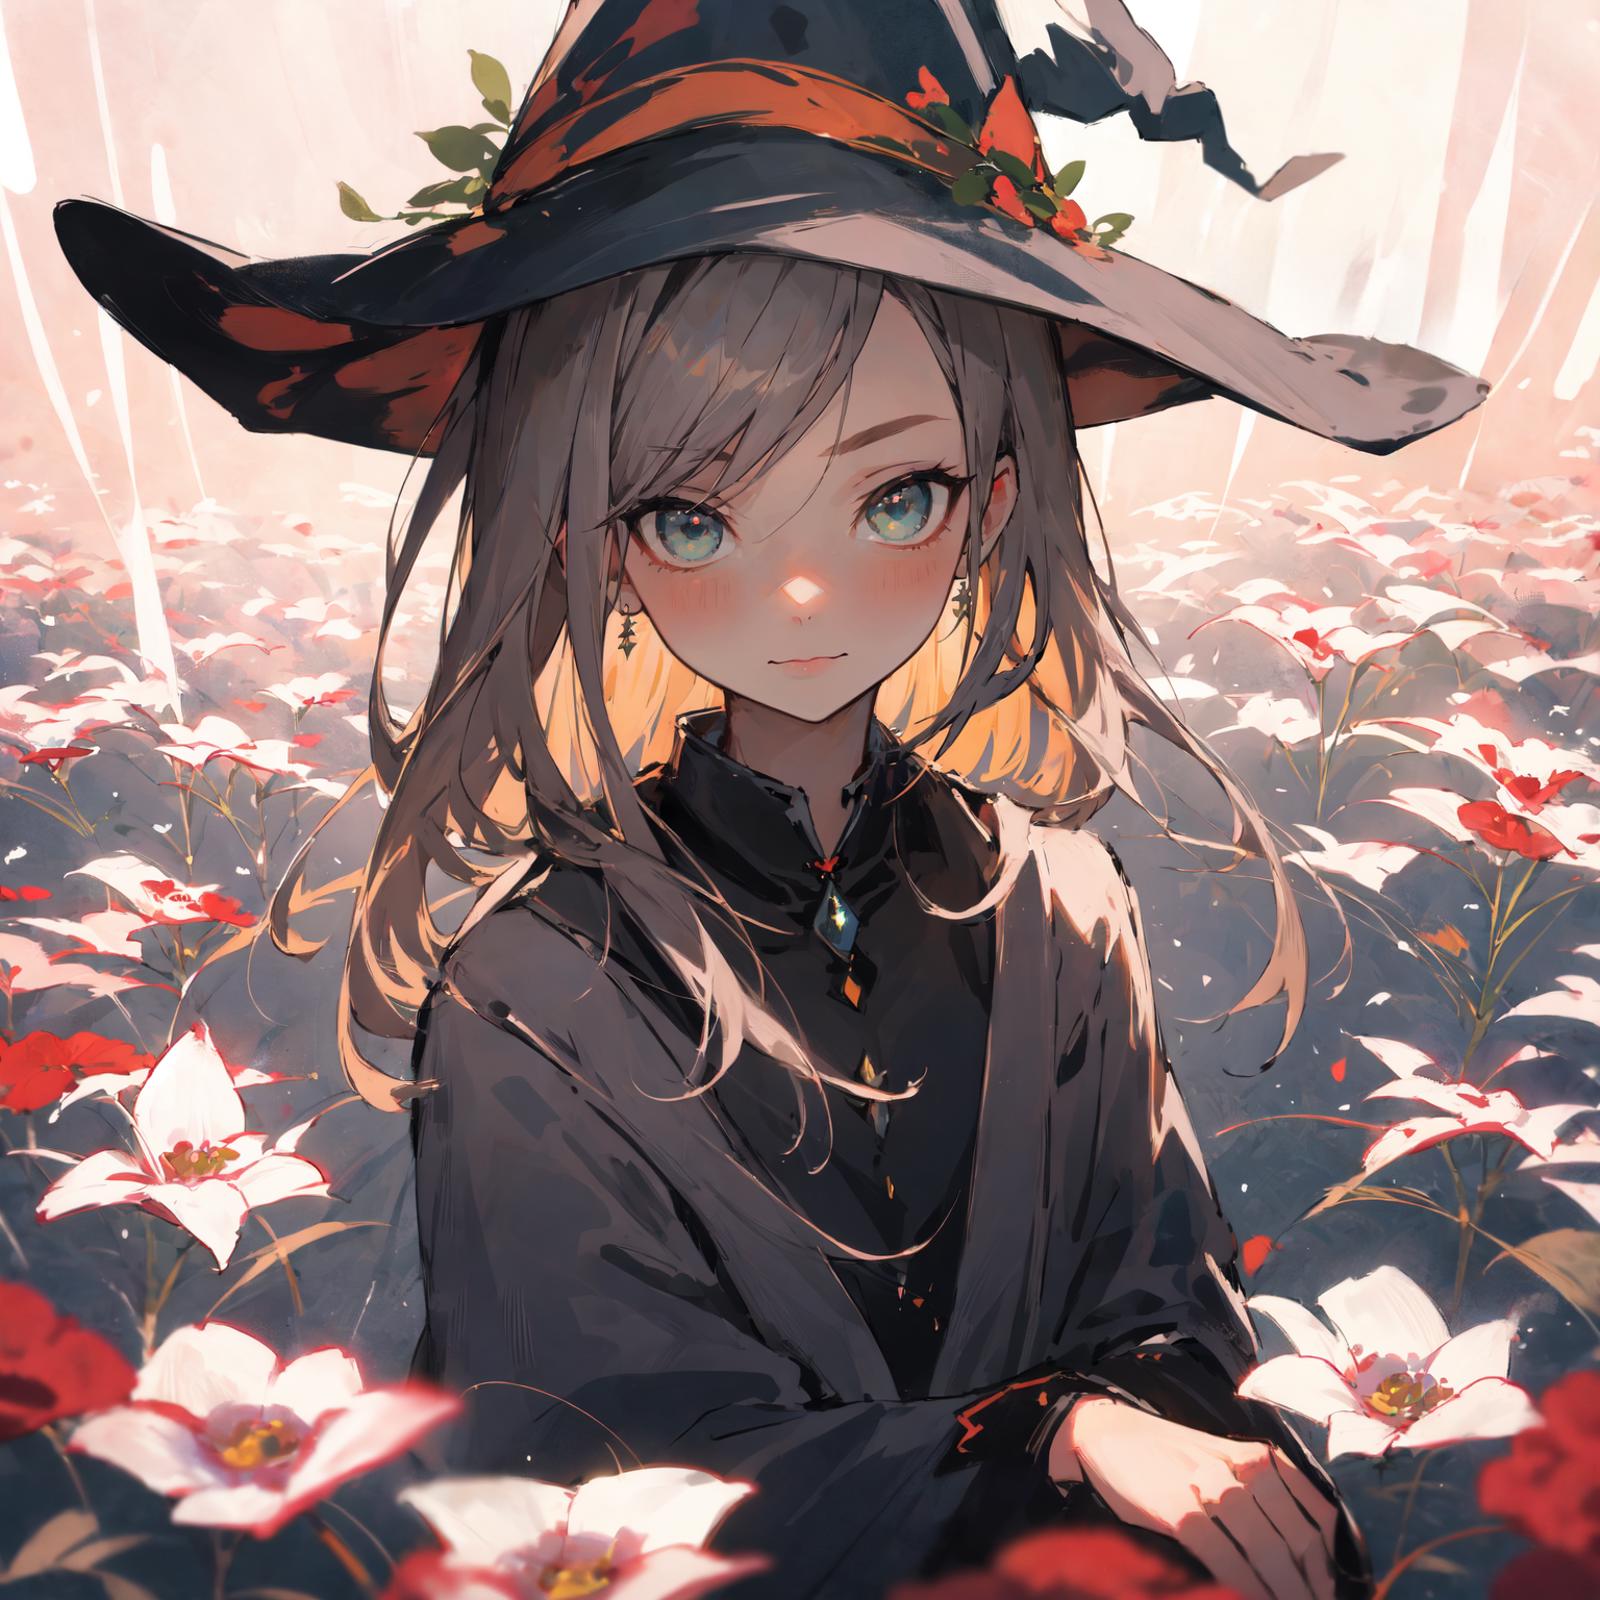 A young girl wearing a witch's hat and dress, surrounded by flowers.